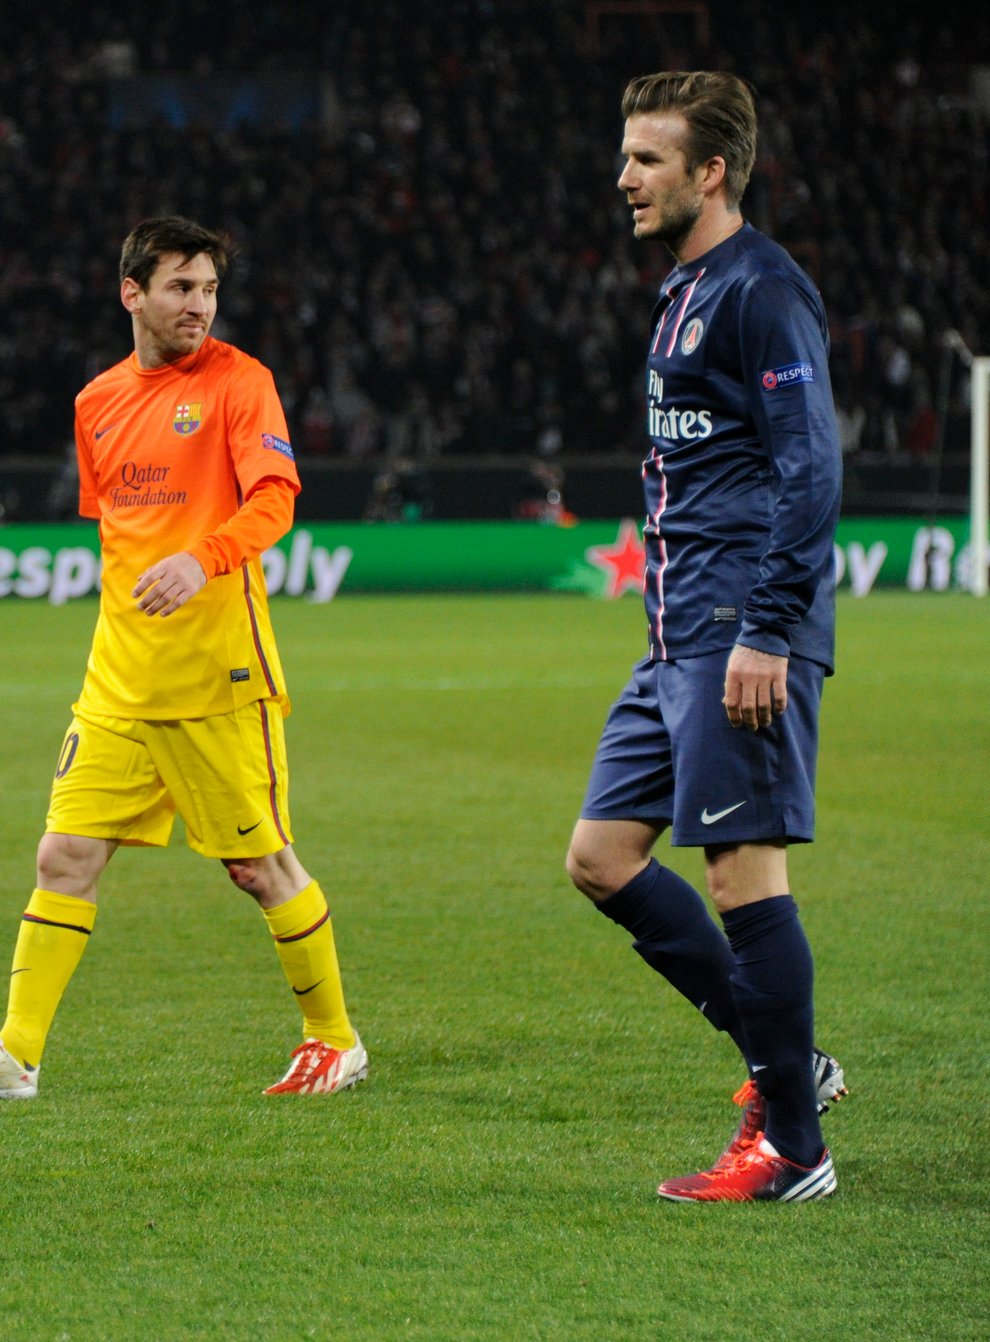 Beckham played against Messi for PSG in the latter stages of his career (PA Images)